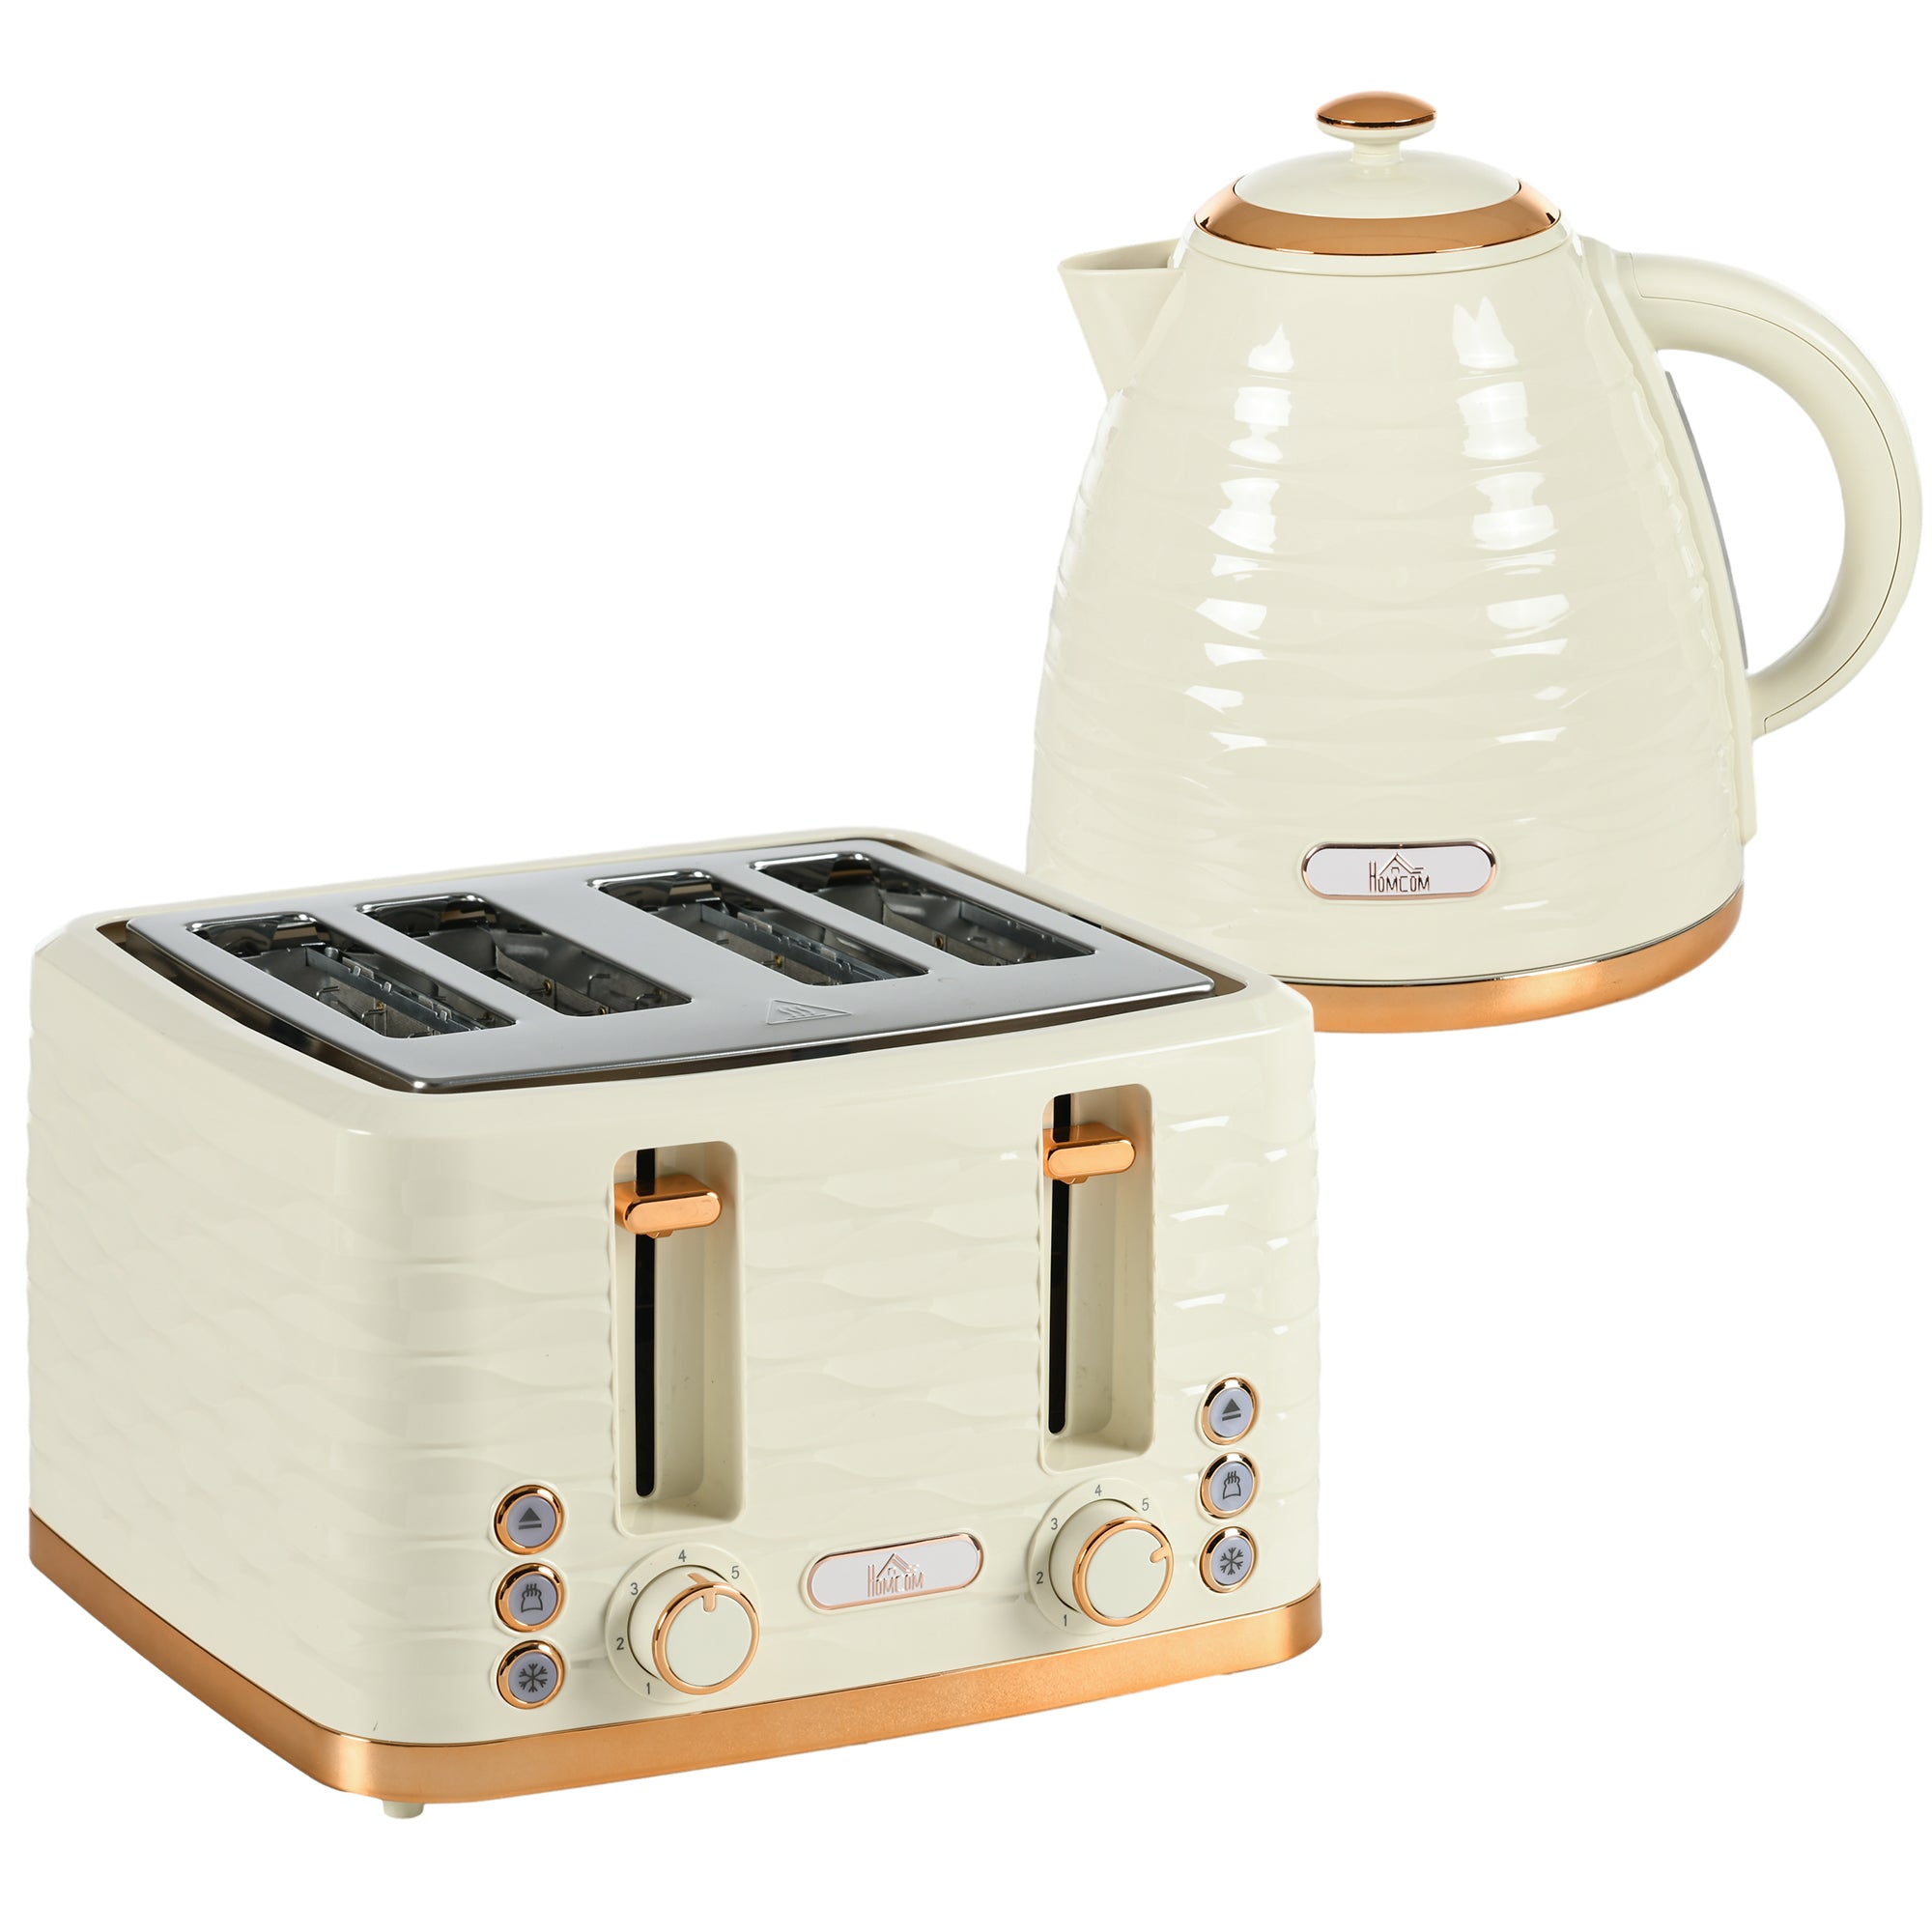 HOMCOM 3000W 1.7L Rapid Boil Kettle & 4 Slice Toaster, Kettle and Toaster Set with 7 Browning Controls and Crumb Tray, Beige